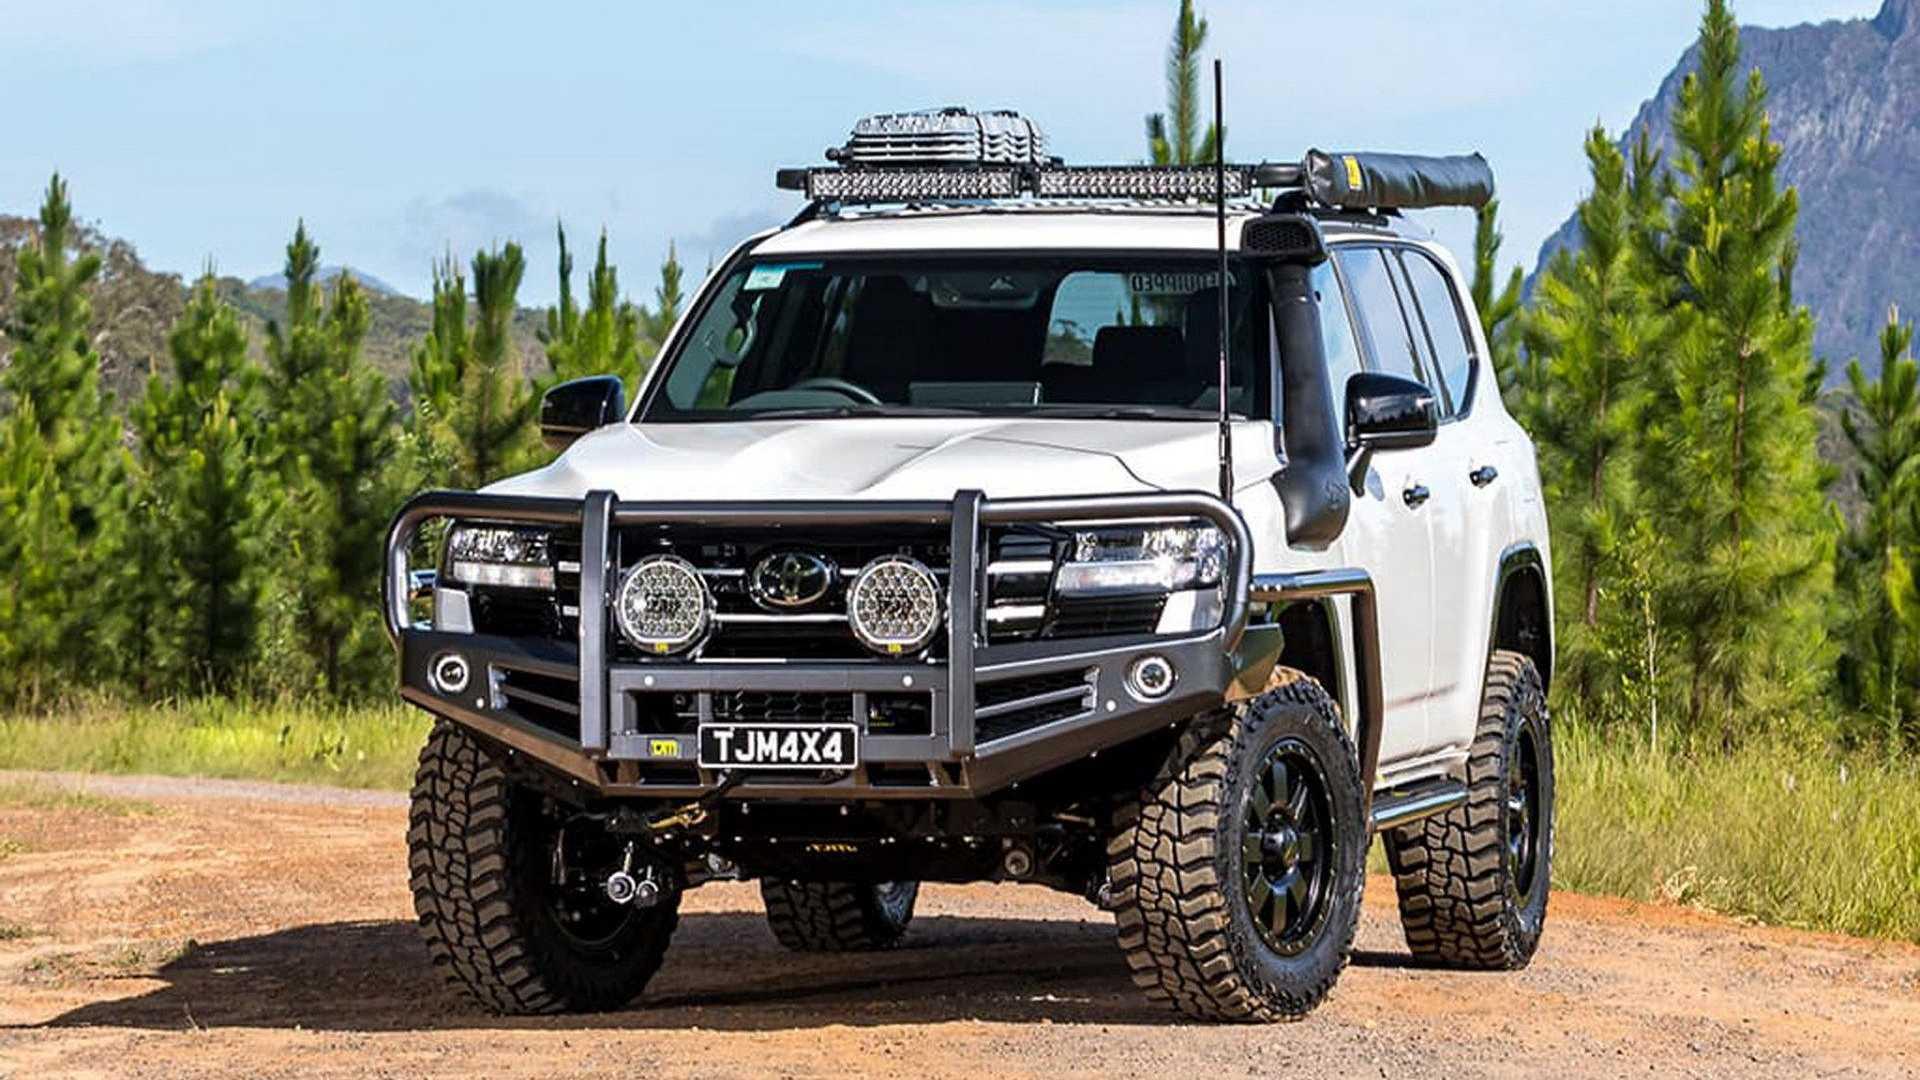 A tuner creates a powerful Toyota Land Cruiser for off-road adventures | Modified Rides